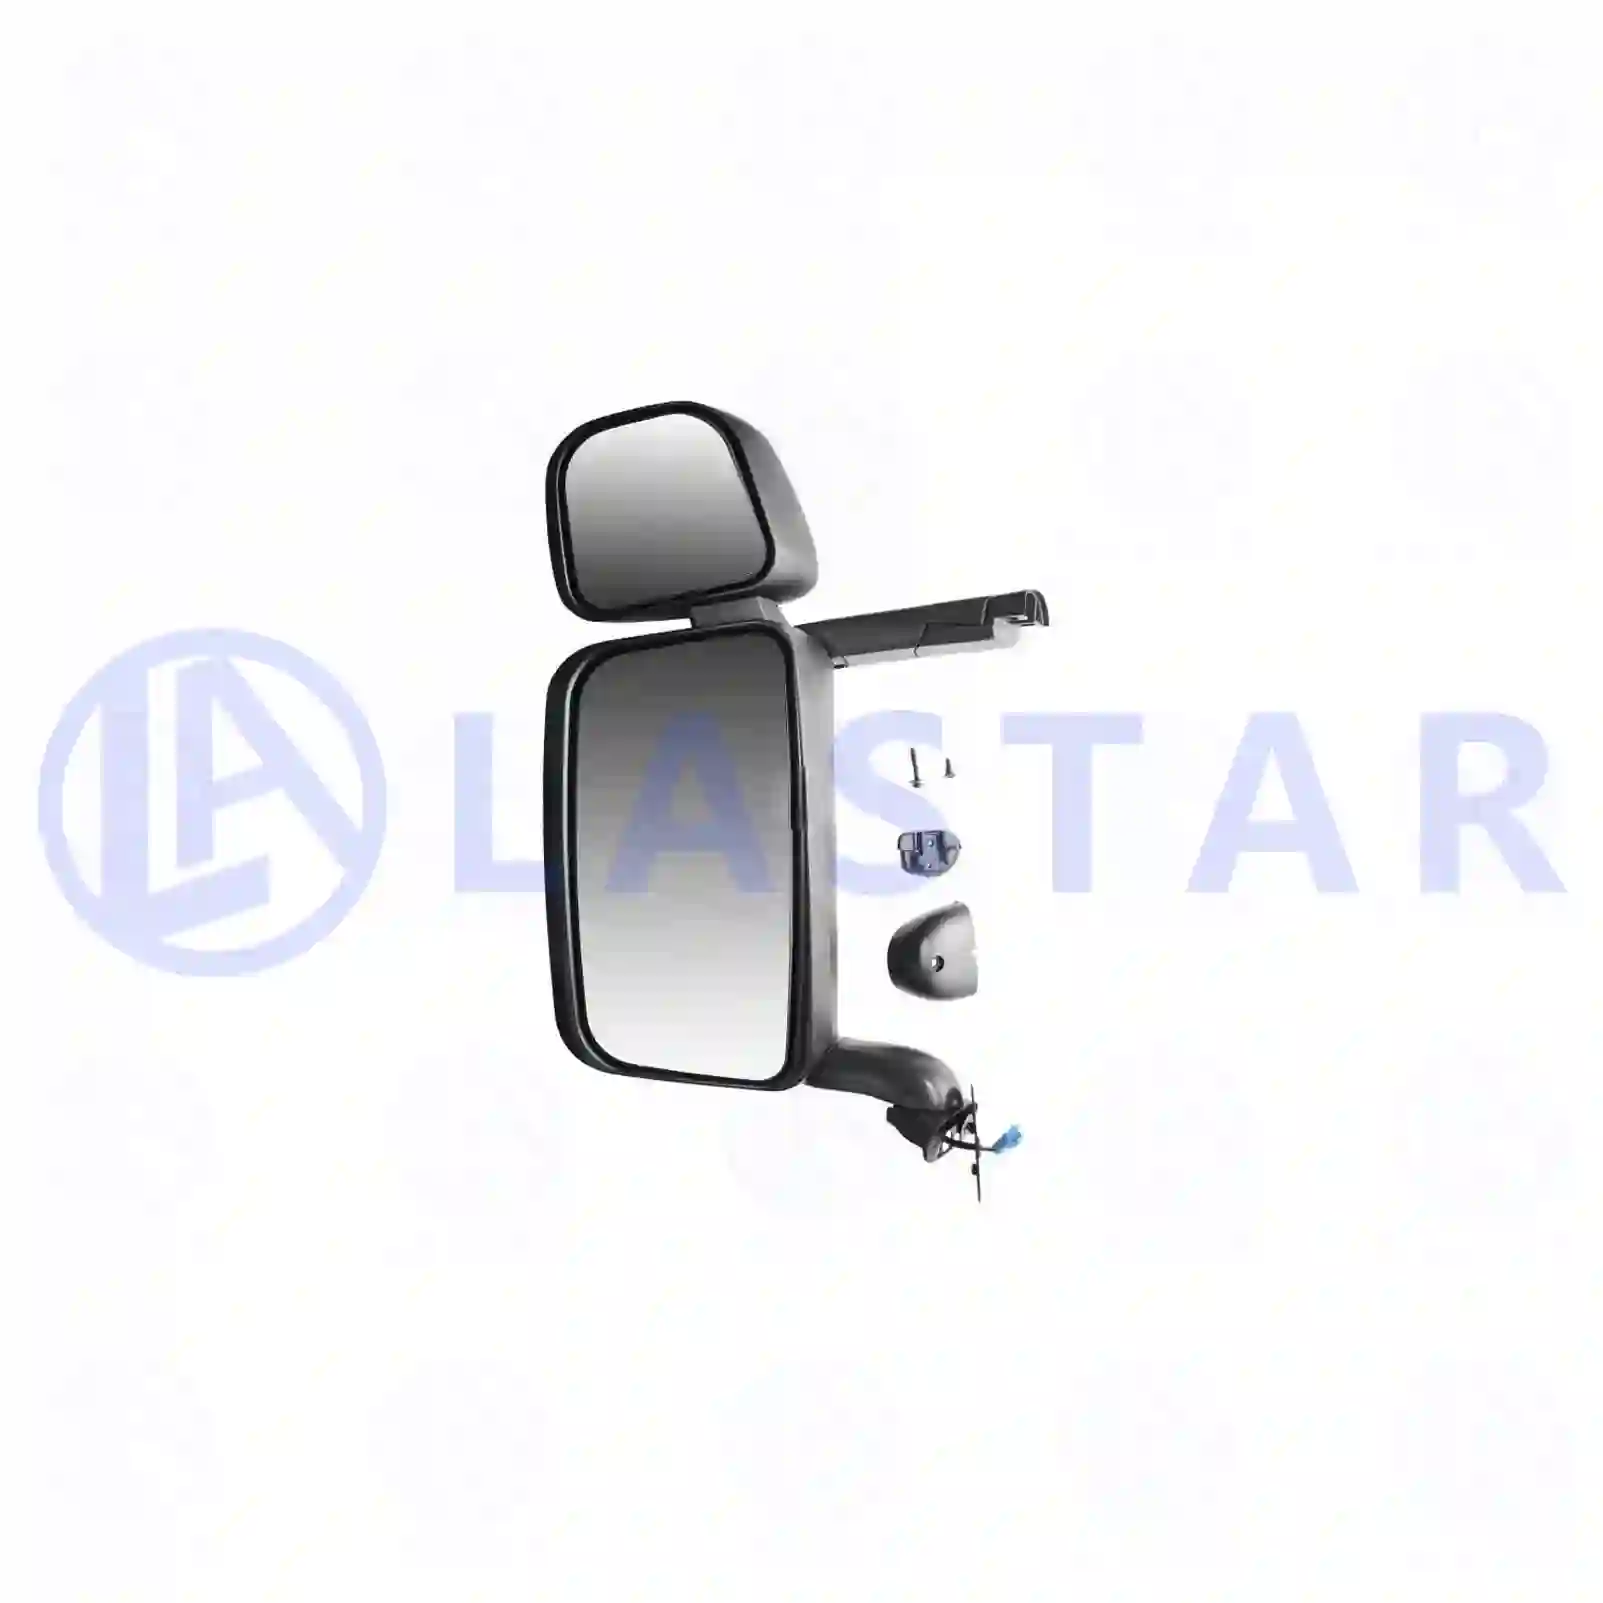 Main mirror, complete, left, heated, electrical, 77720194, 1723518, 2425815, ZG60941-0008, ||  77720194 Lastar Spare Part | Truck Spare Parts, Auotomotive Spare Parts Main mirror, complete, left, heated, electrical, 77720194, 1723518, 2425815, ZG60941-0008, ||  77720194 Lastar Spare Part | Truck Spare Parts, Auotomotive Spare Parts